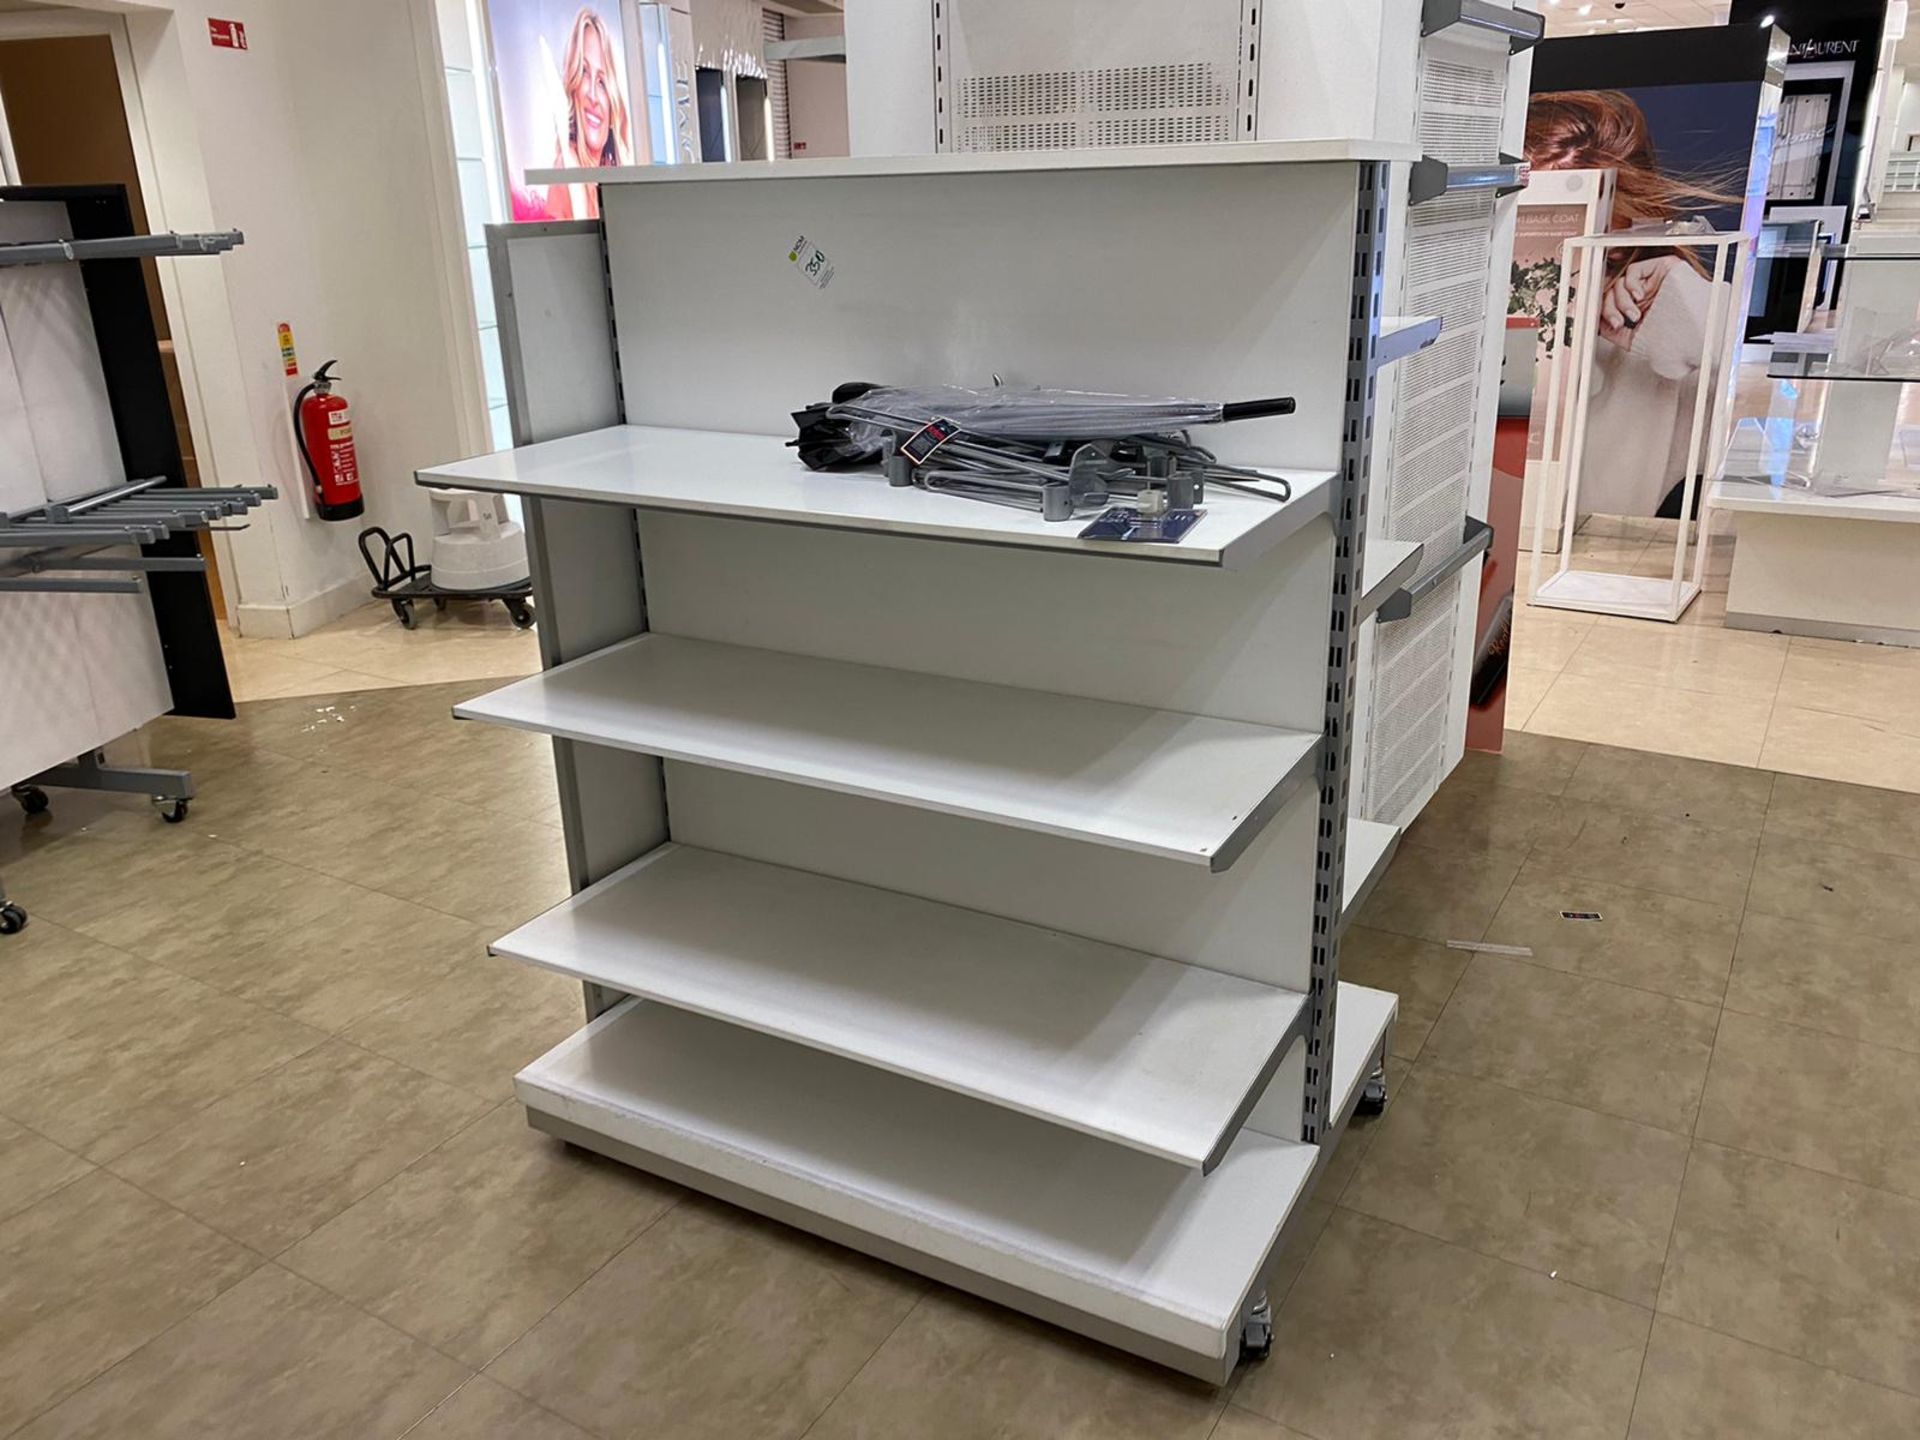 Metal Framed Shelving Unit With White Shelving includes contents